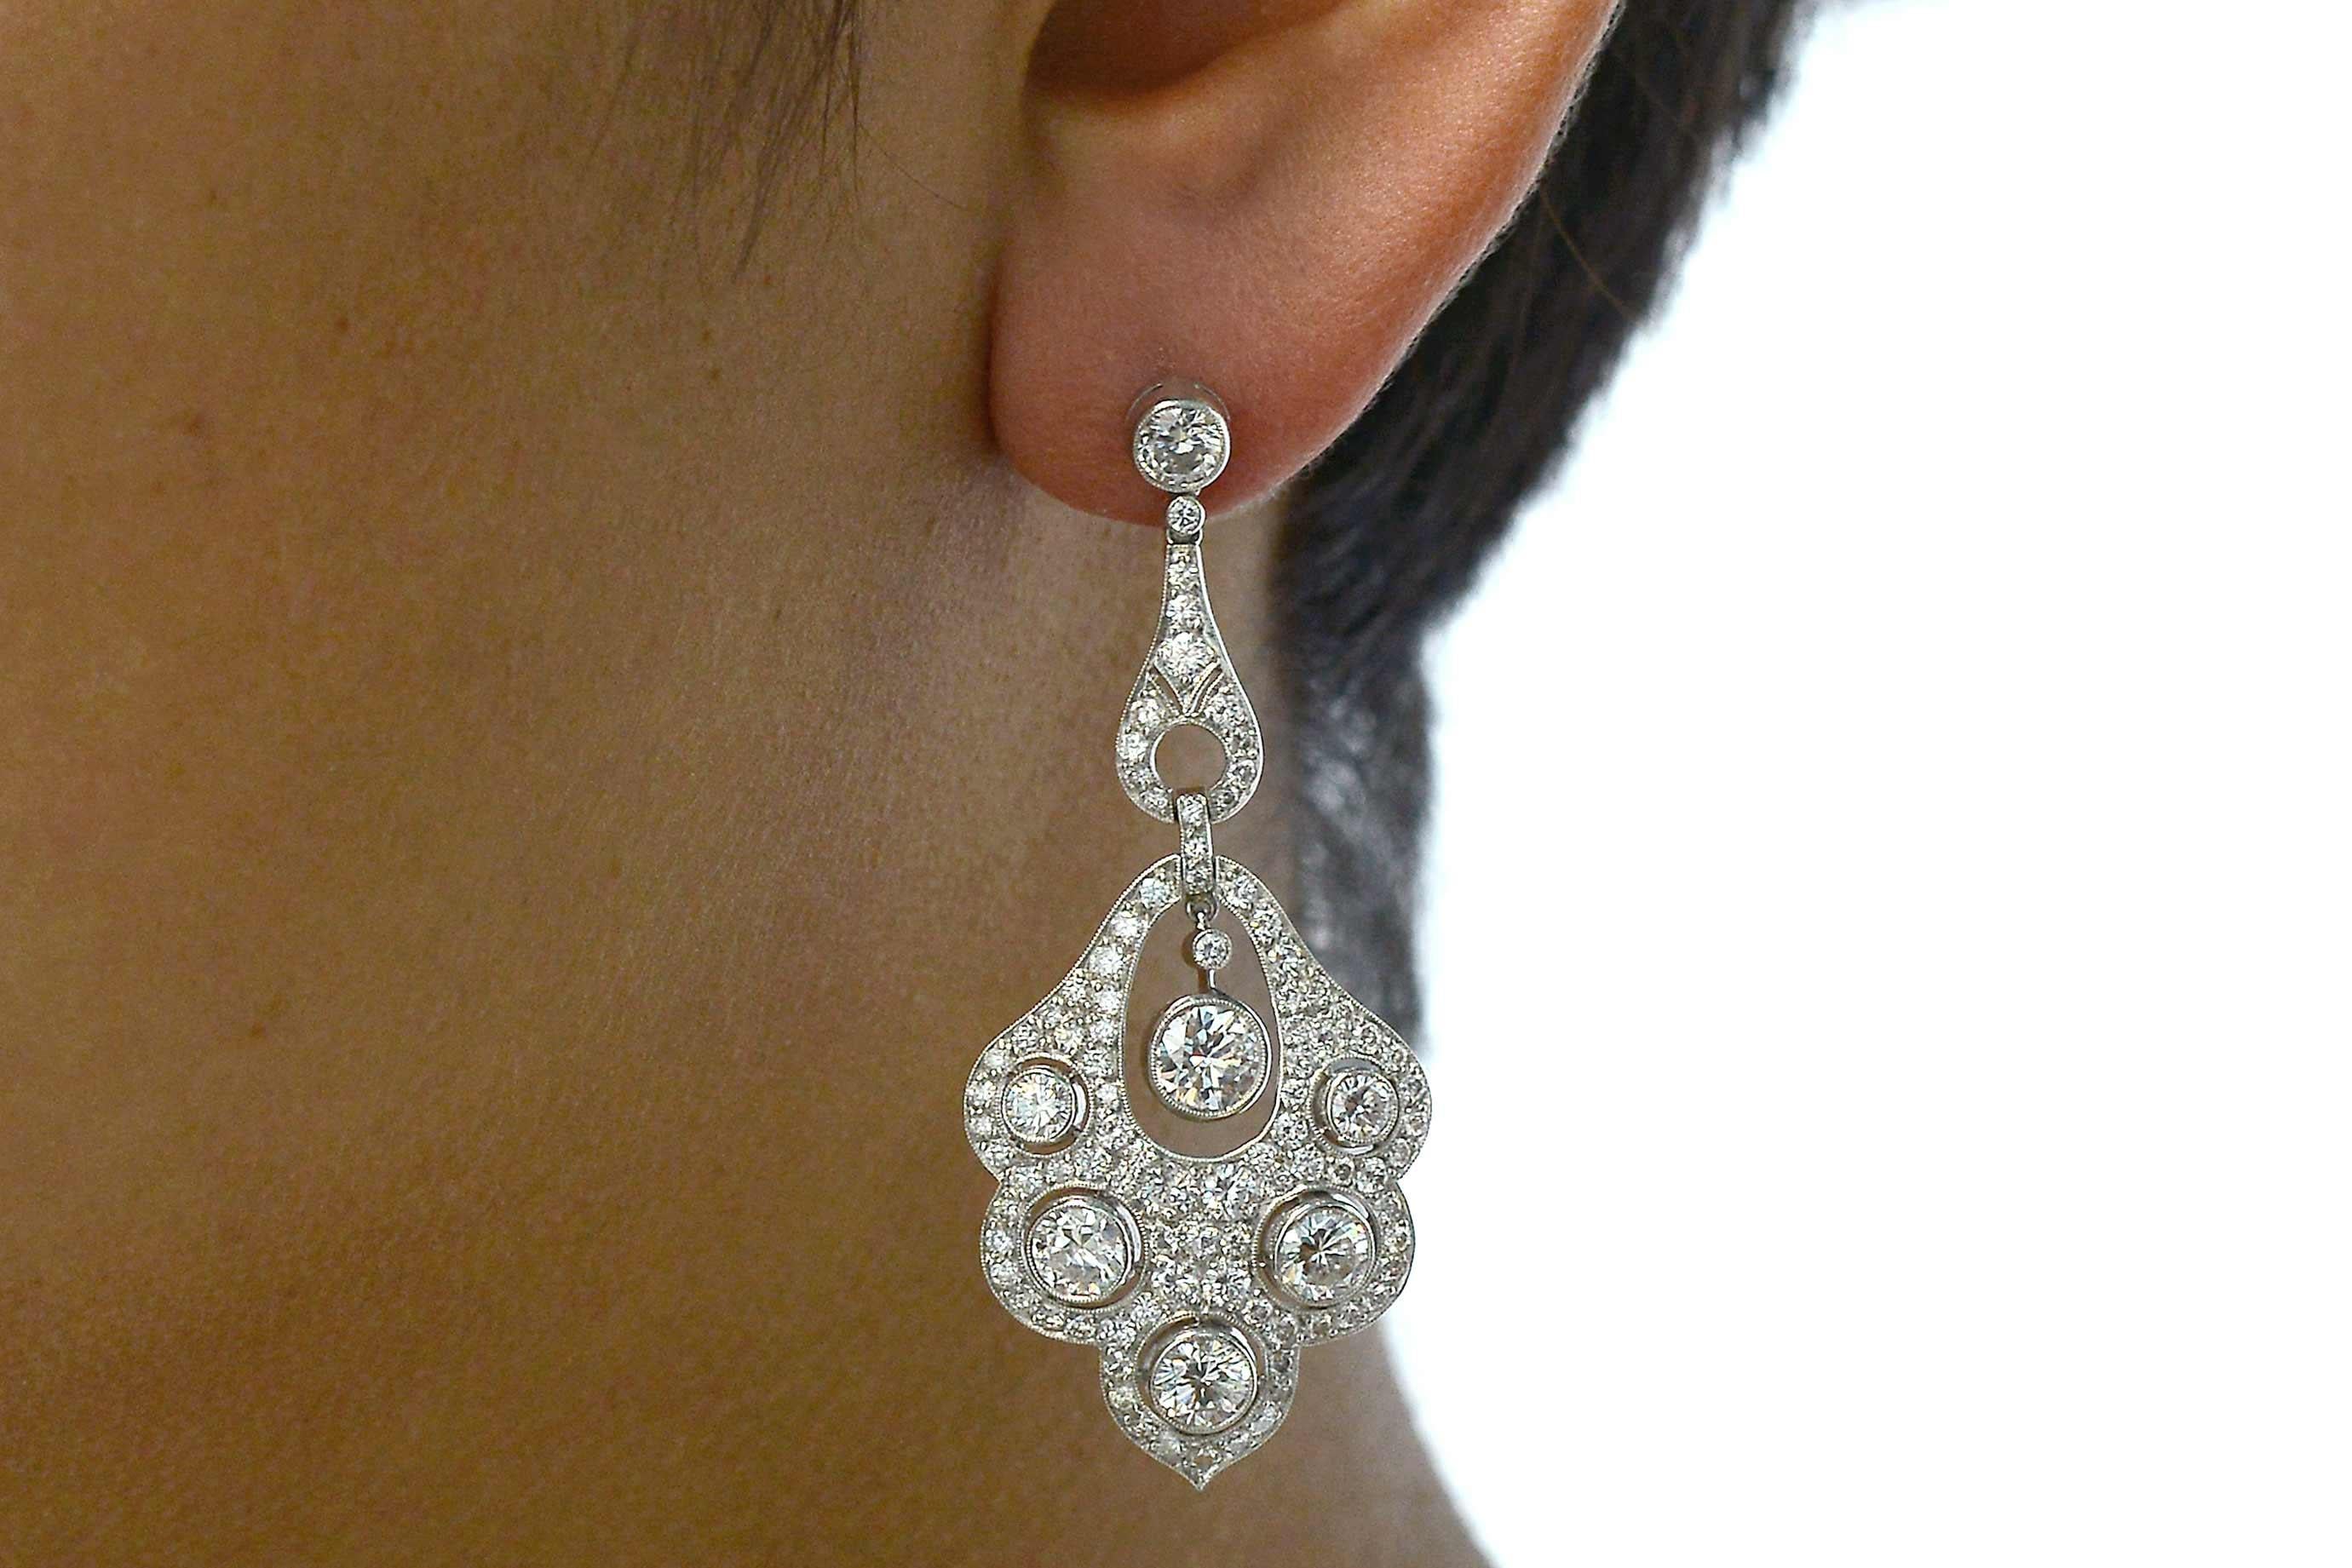 A pair of dramatic 6 carats diamond dangle earrings of dazzling brilliance. These chandelier earrings at 2